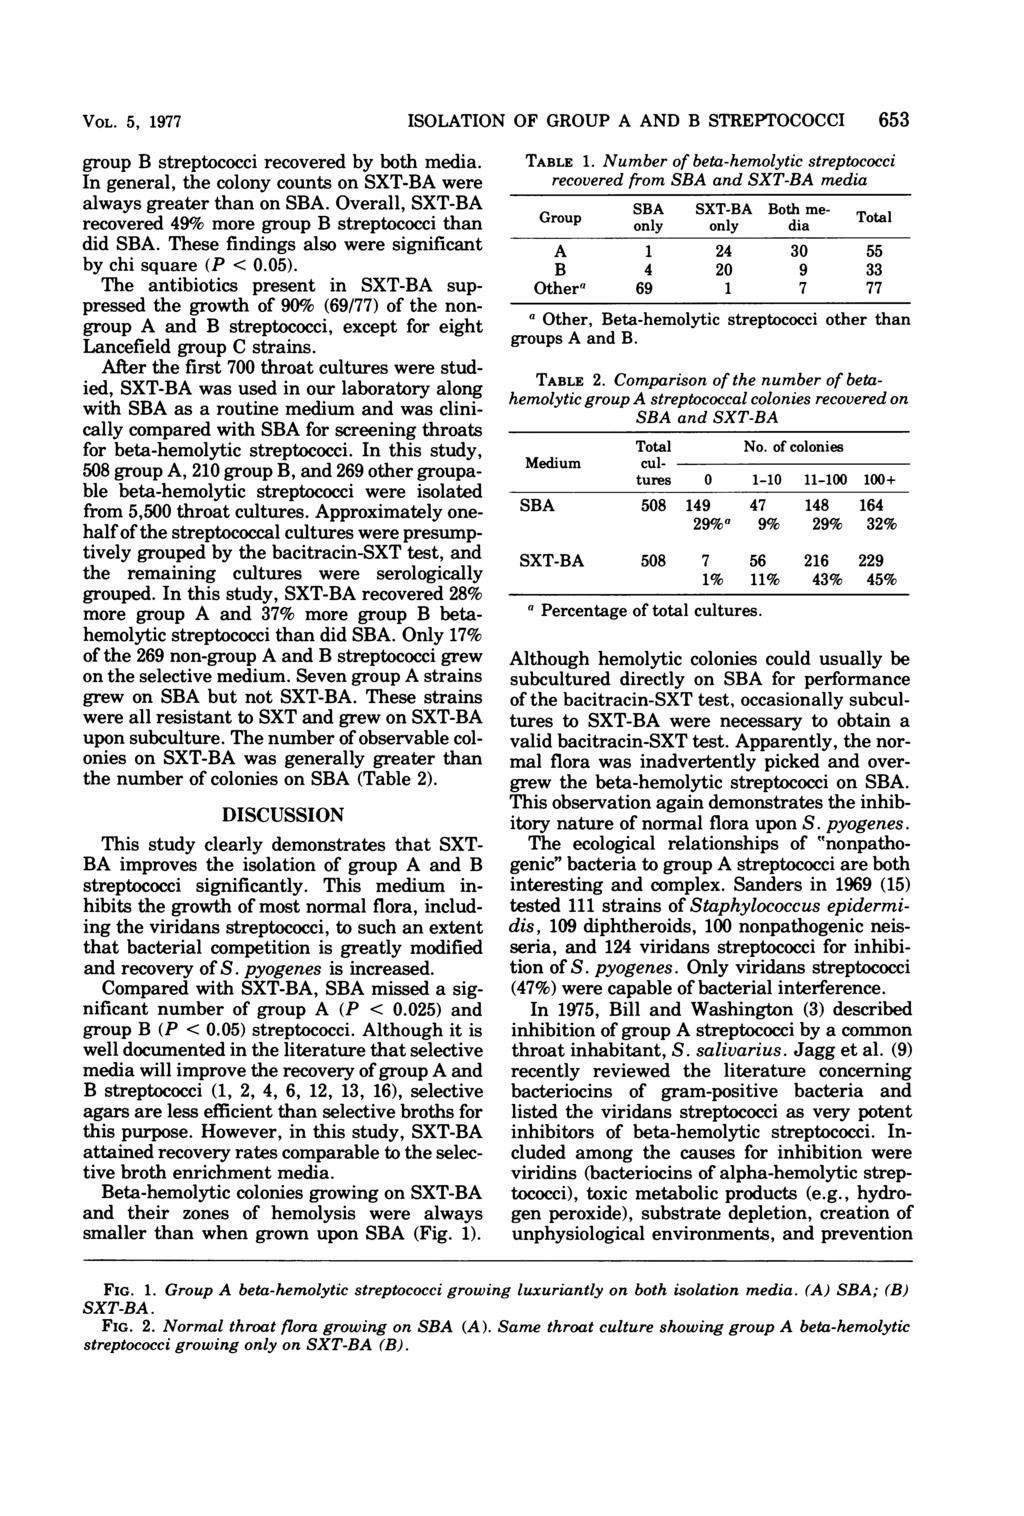 VOL. 5, 1977 group B streptococci recovered by both media. In general, the colony counts on SXT-BA were always greater than on SBA.